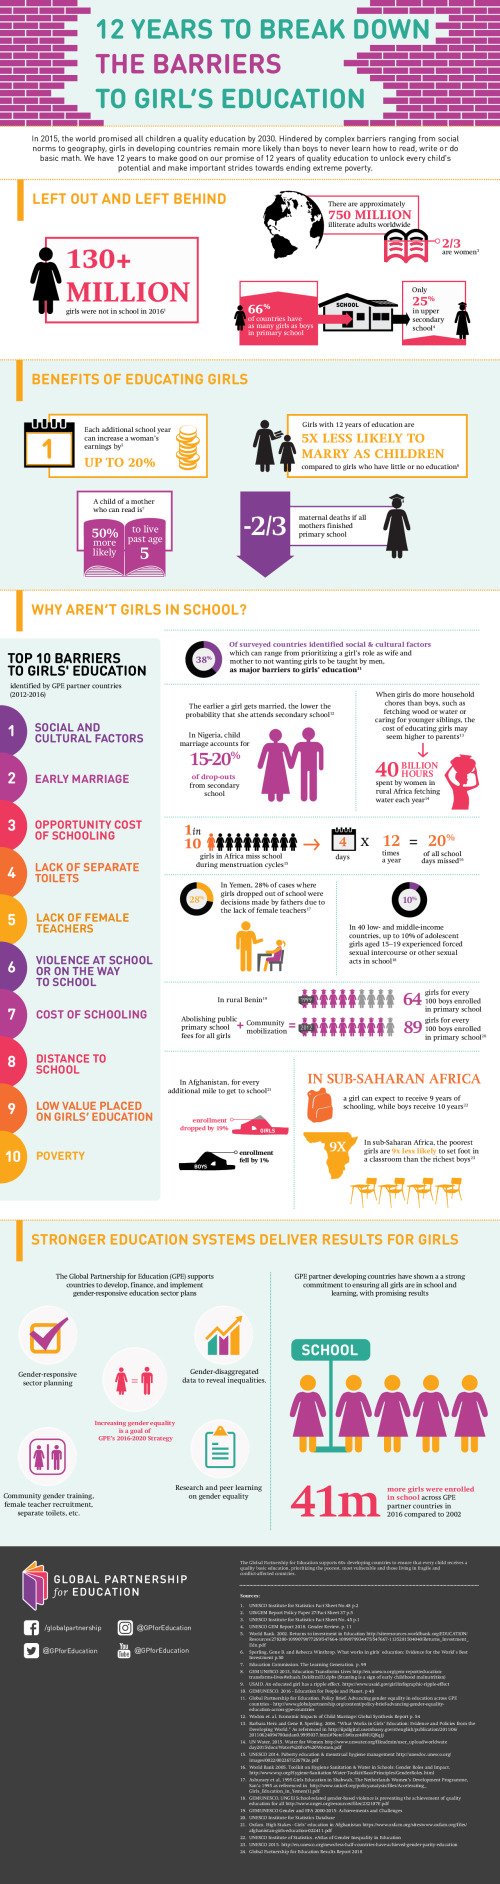 12 Years to Break Down the Barriers to Girls' Education 